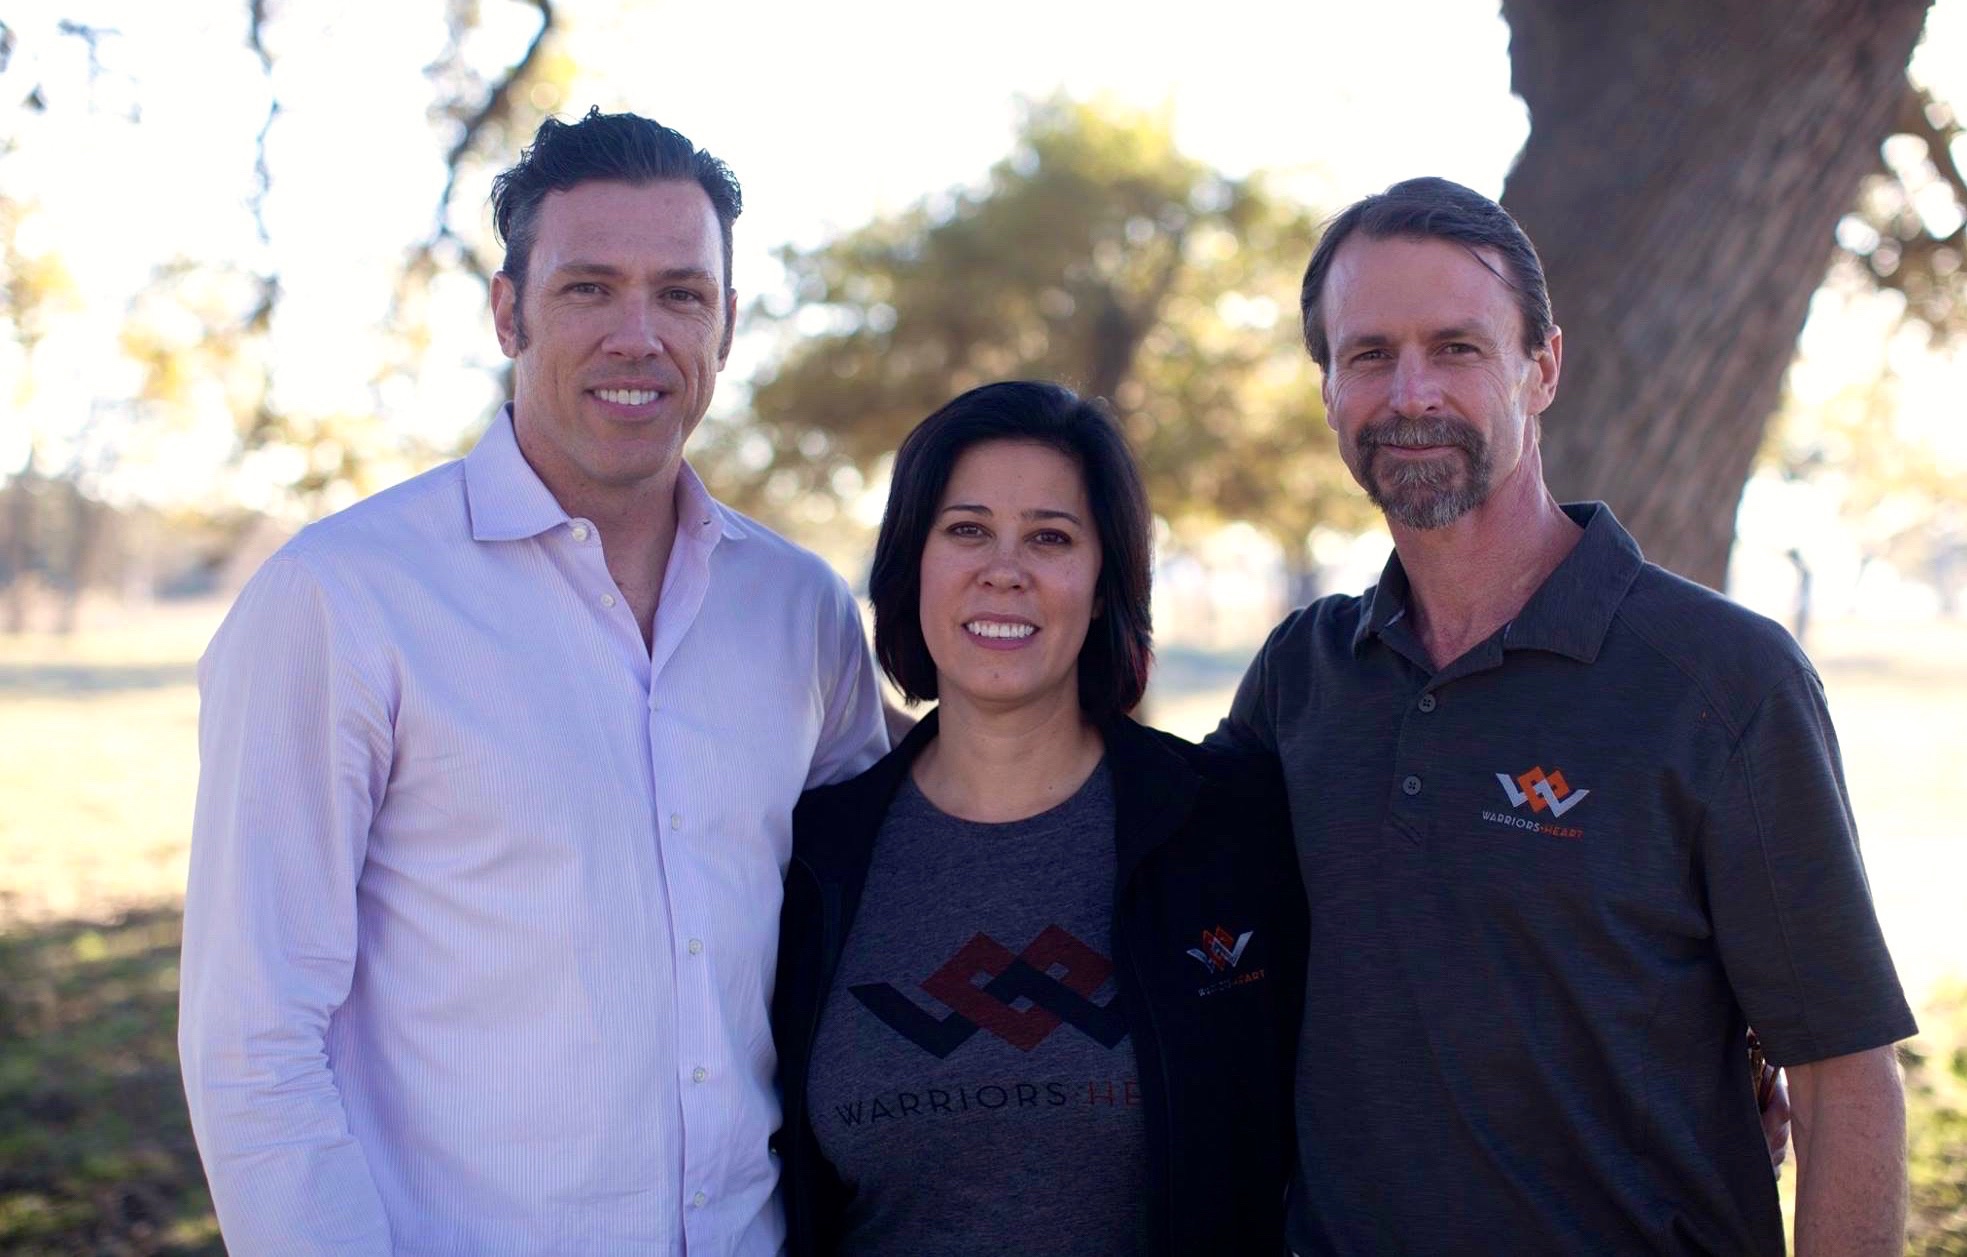 3 Warriors Heart Founders: L to R: Josh Lannon, Lisa Lannon and Tom Spooner started Warriors Heart in Bandera, Texas.